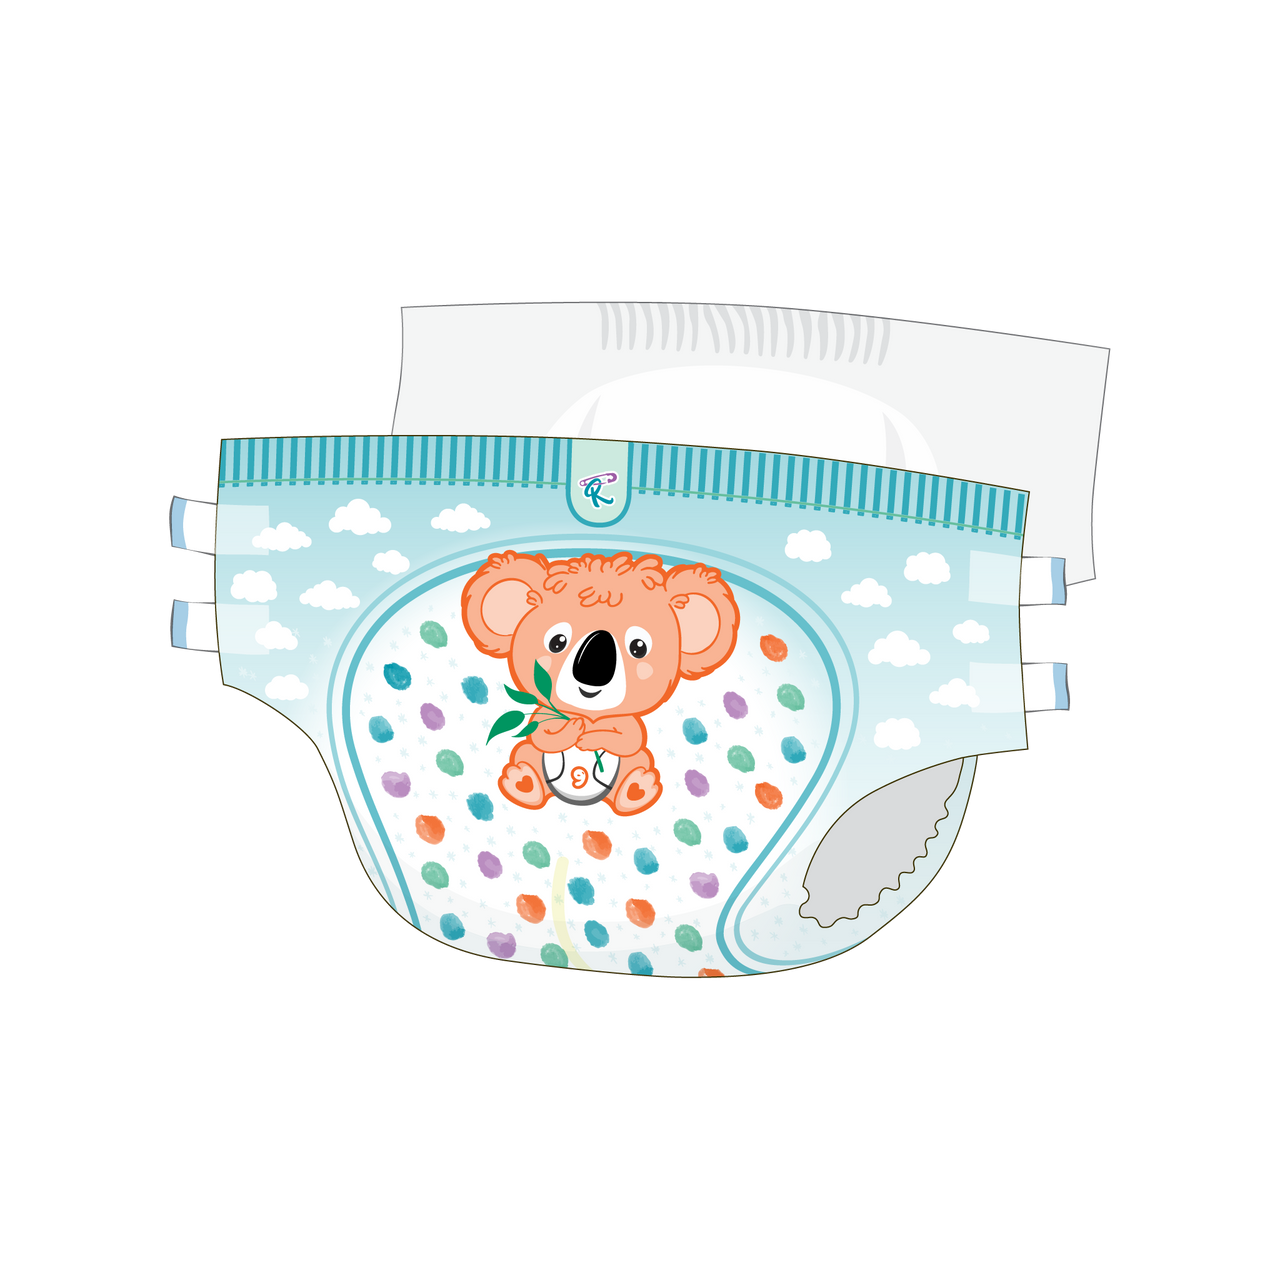  Rearz - Critter Caboose Brief Adult Printed Diapers Sample -  8000ml (Large (33-42)) : Rearz: Health & Household